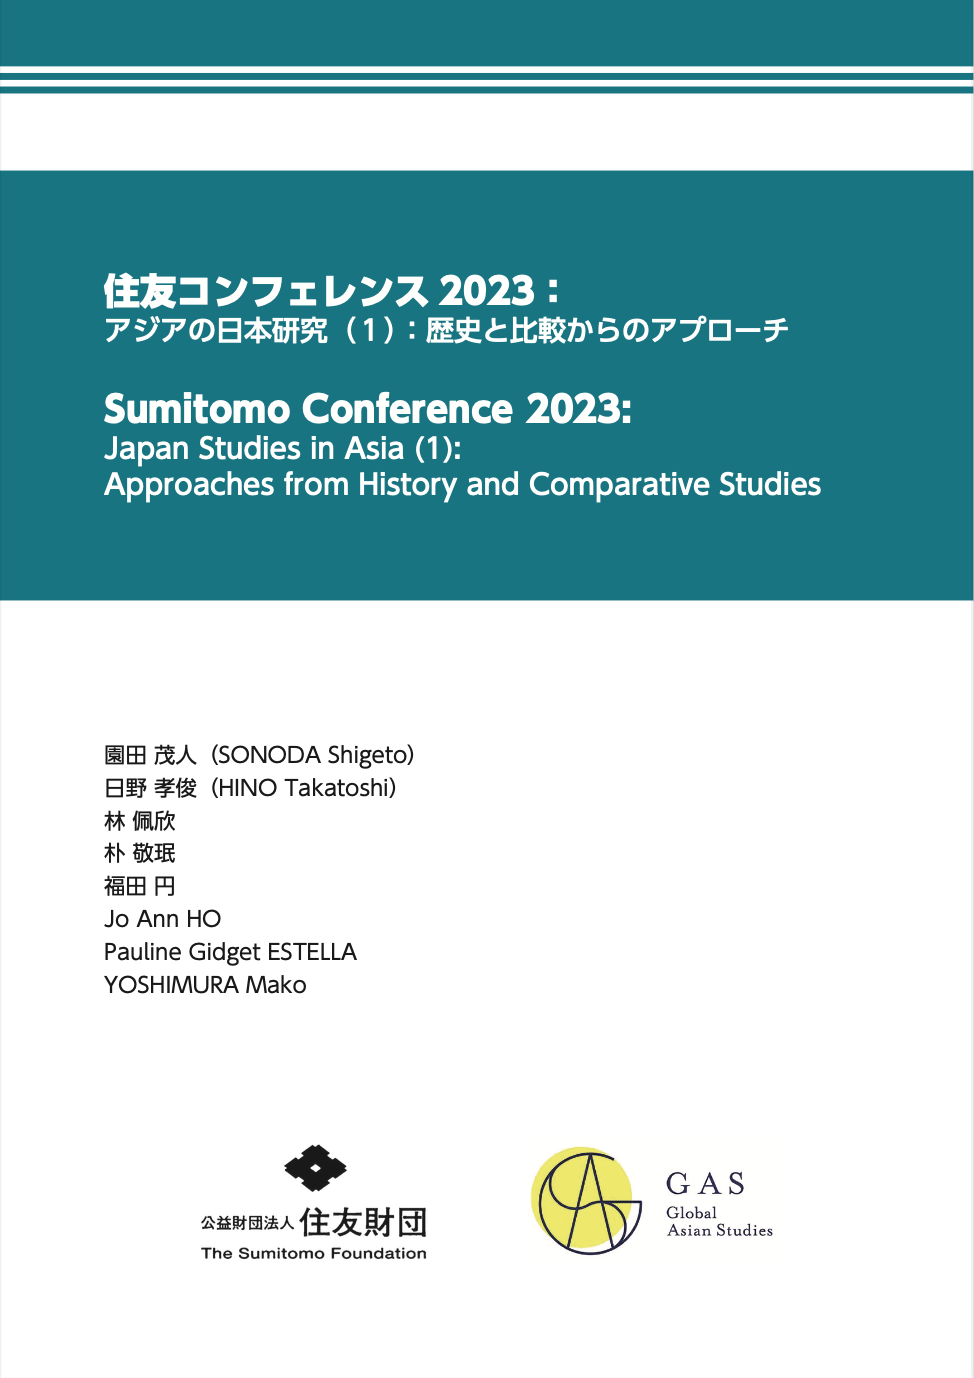 Booklet “Sumitomo Conference 2023: Japan Studies in Asia (1): Approaches from History and Comparative Studies”